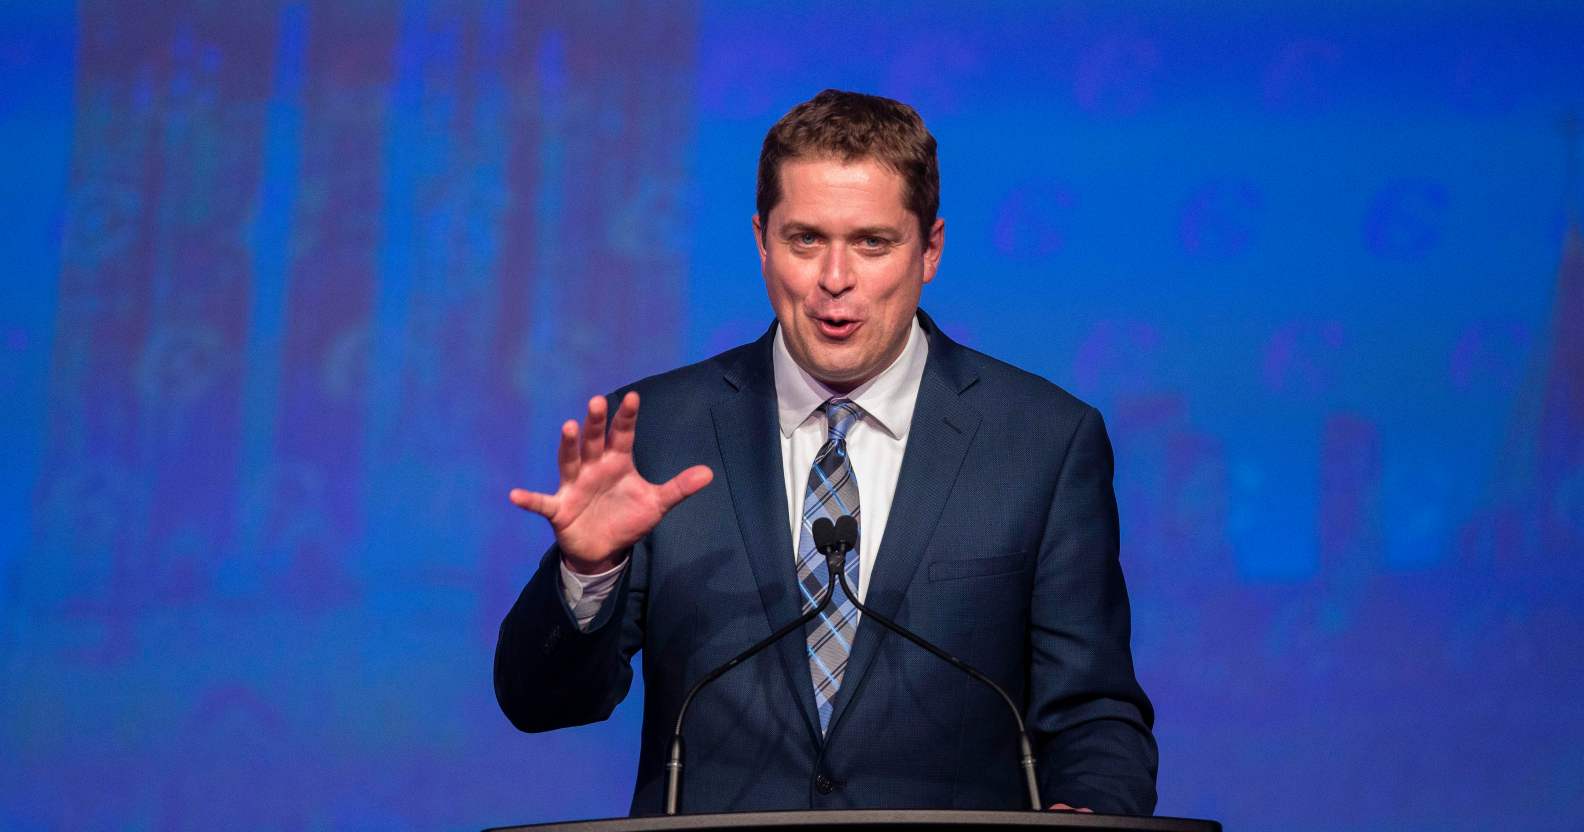 Andrew Scheer, newly elected leader of the Conservative Party of Canada, speaks at the party's convention in Toronto, Ontario, May 27, 2017